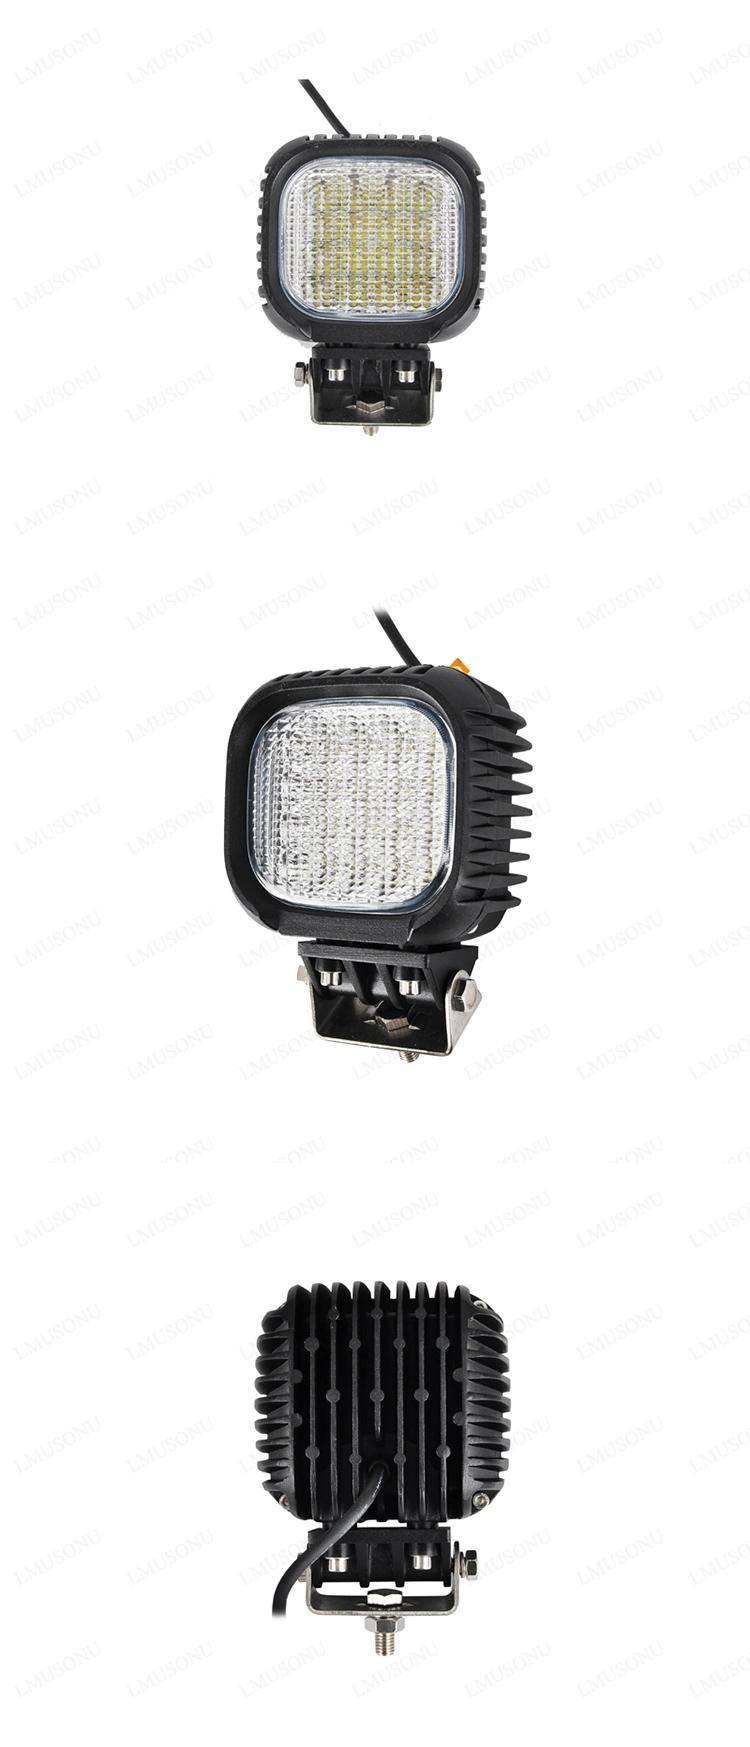 CREE Offroad 5 Inch Auto 12V LED Work Light 48W